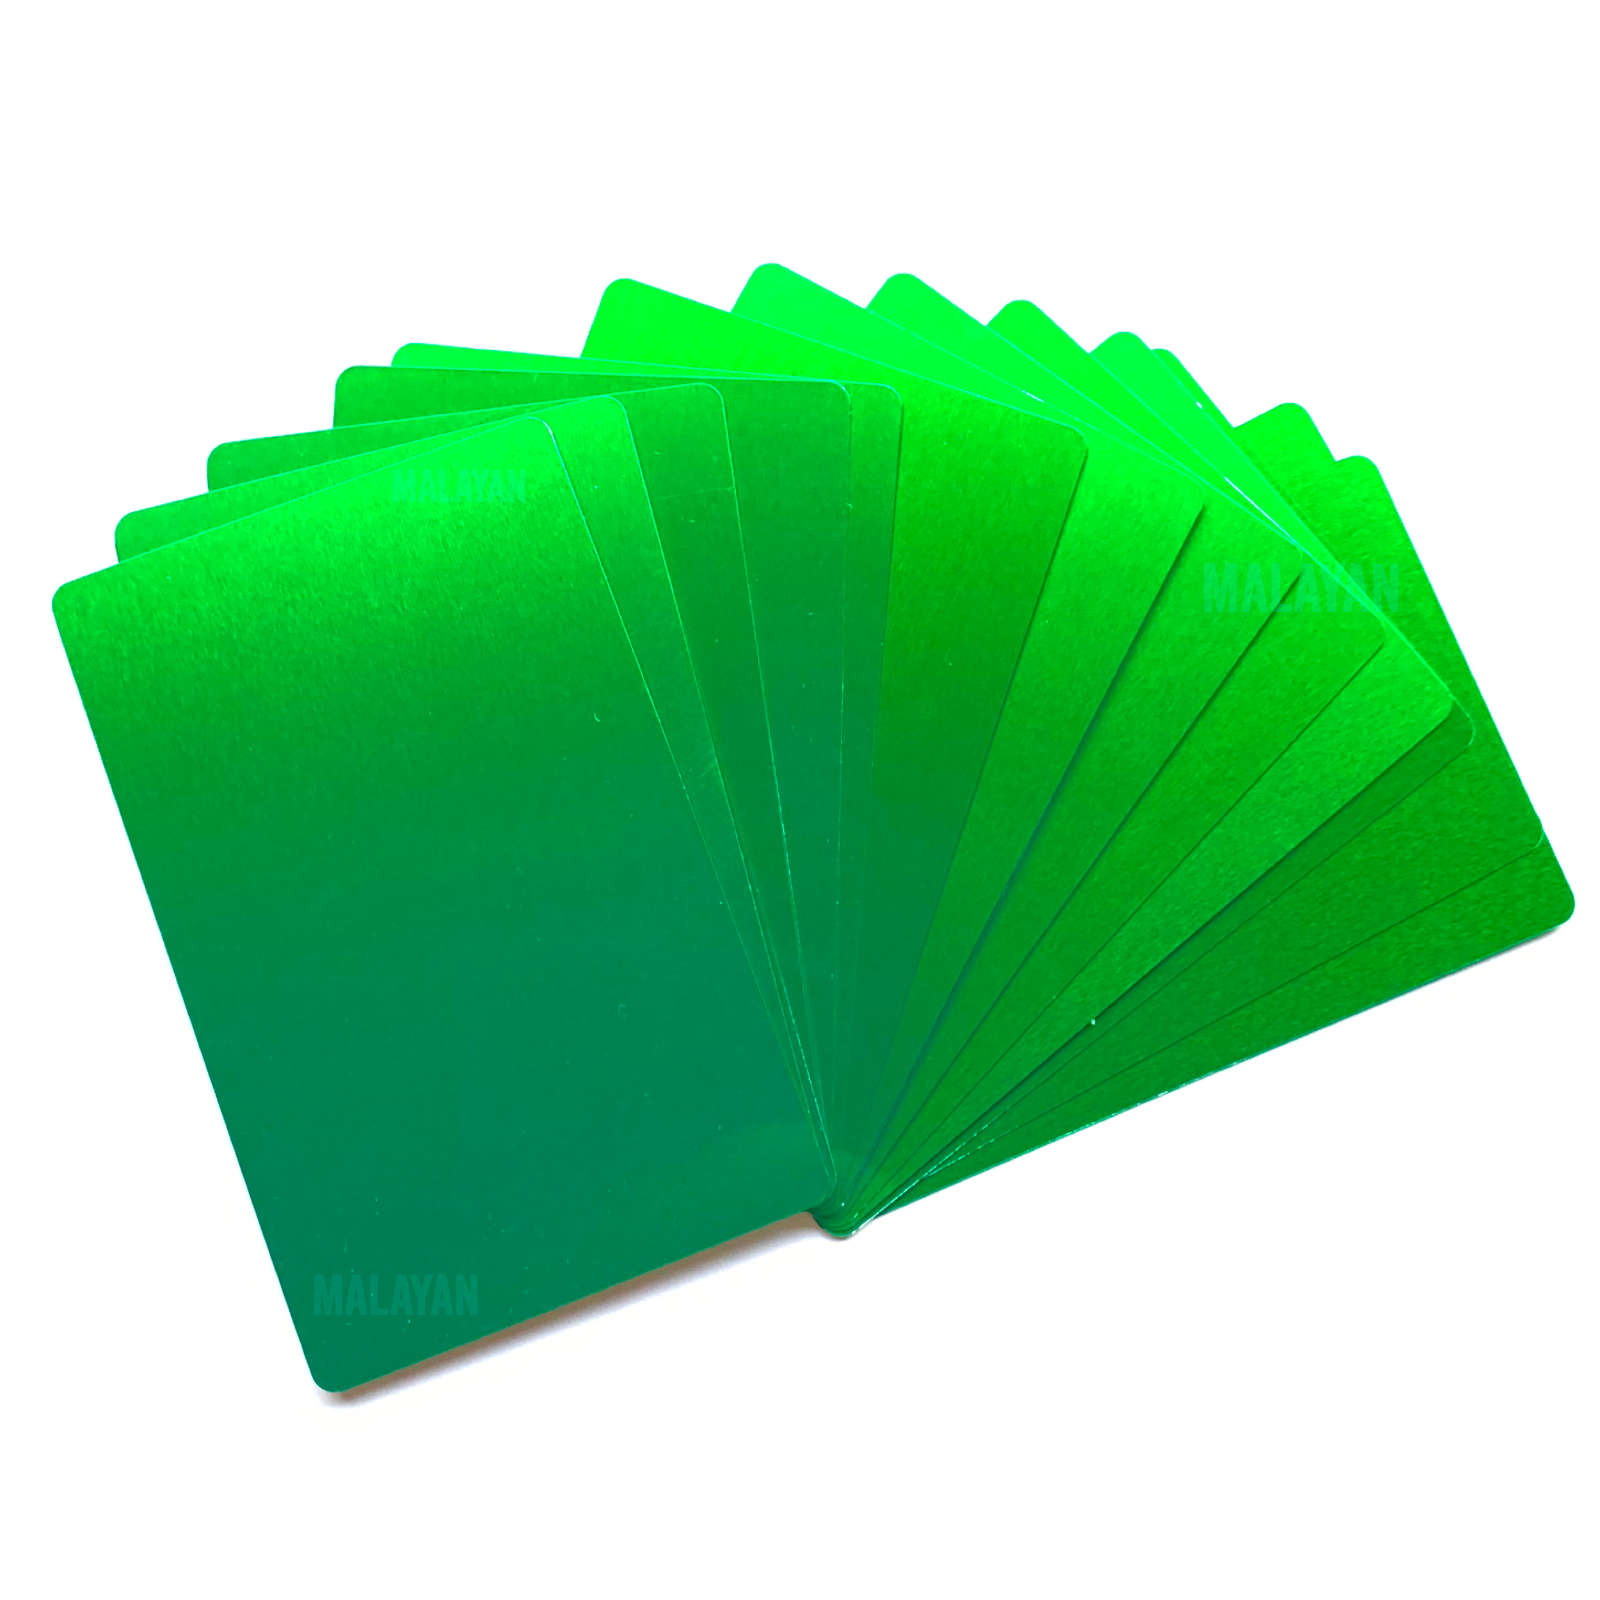 100 Green Aluminum Business Card Blanks Laser Engraving Sheet Metal CNC Plate Malayan Does Not Apply